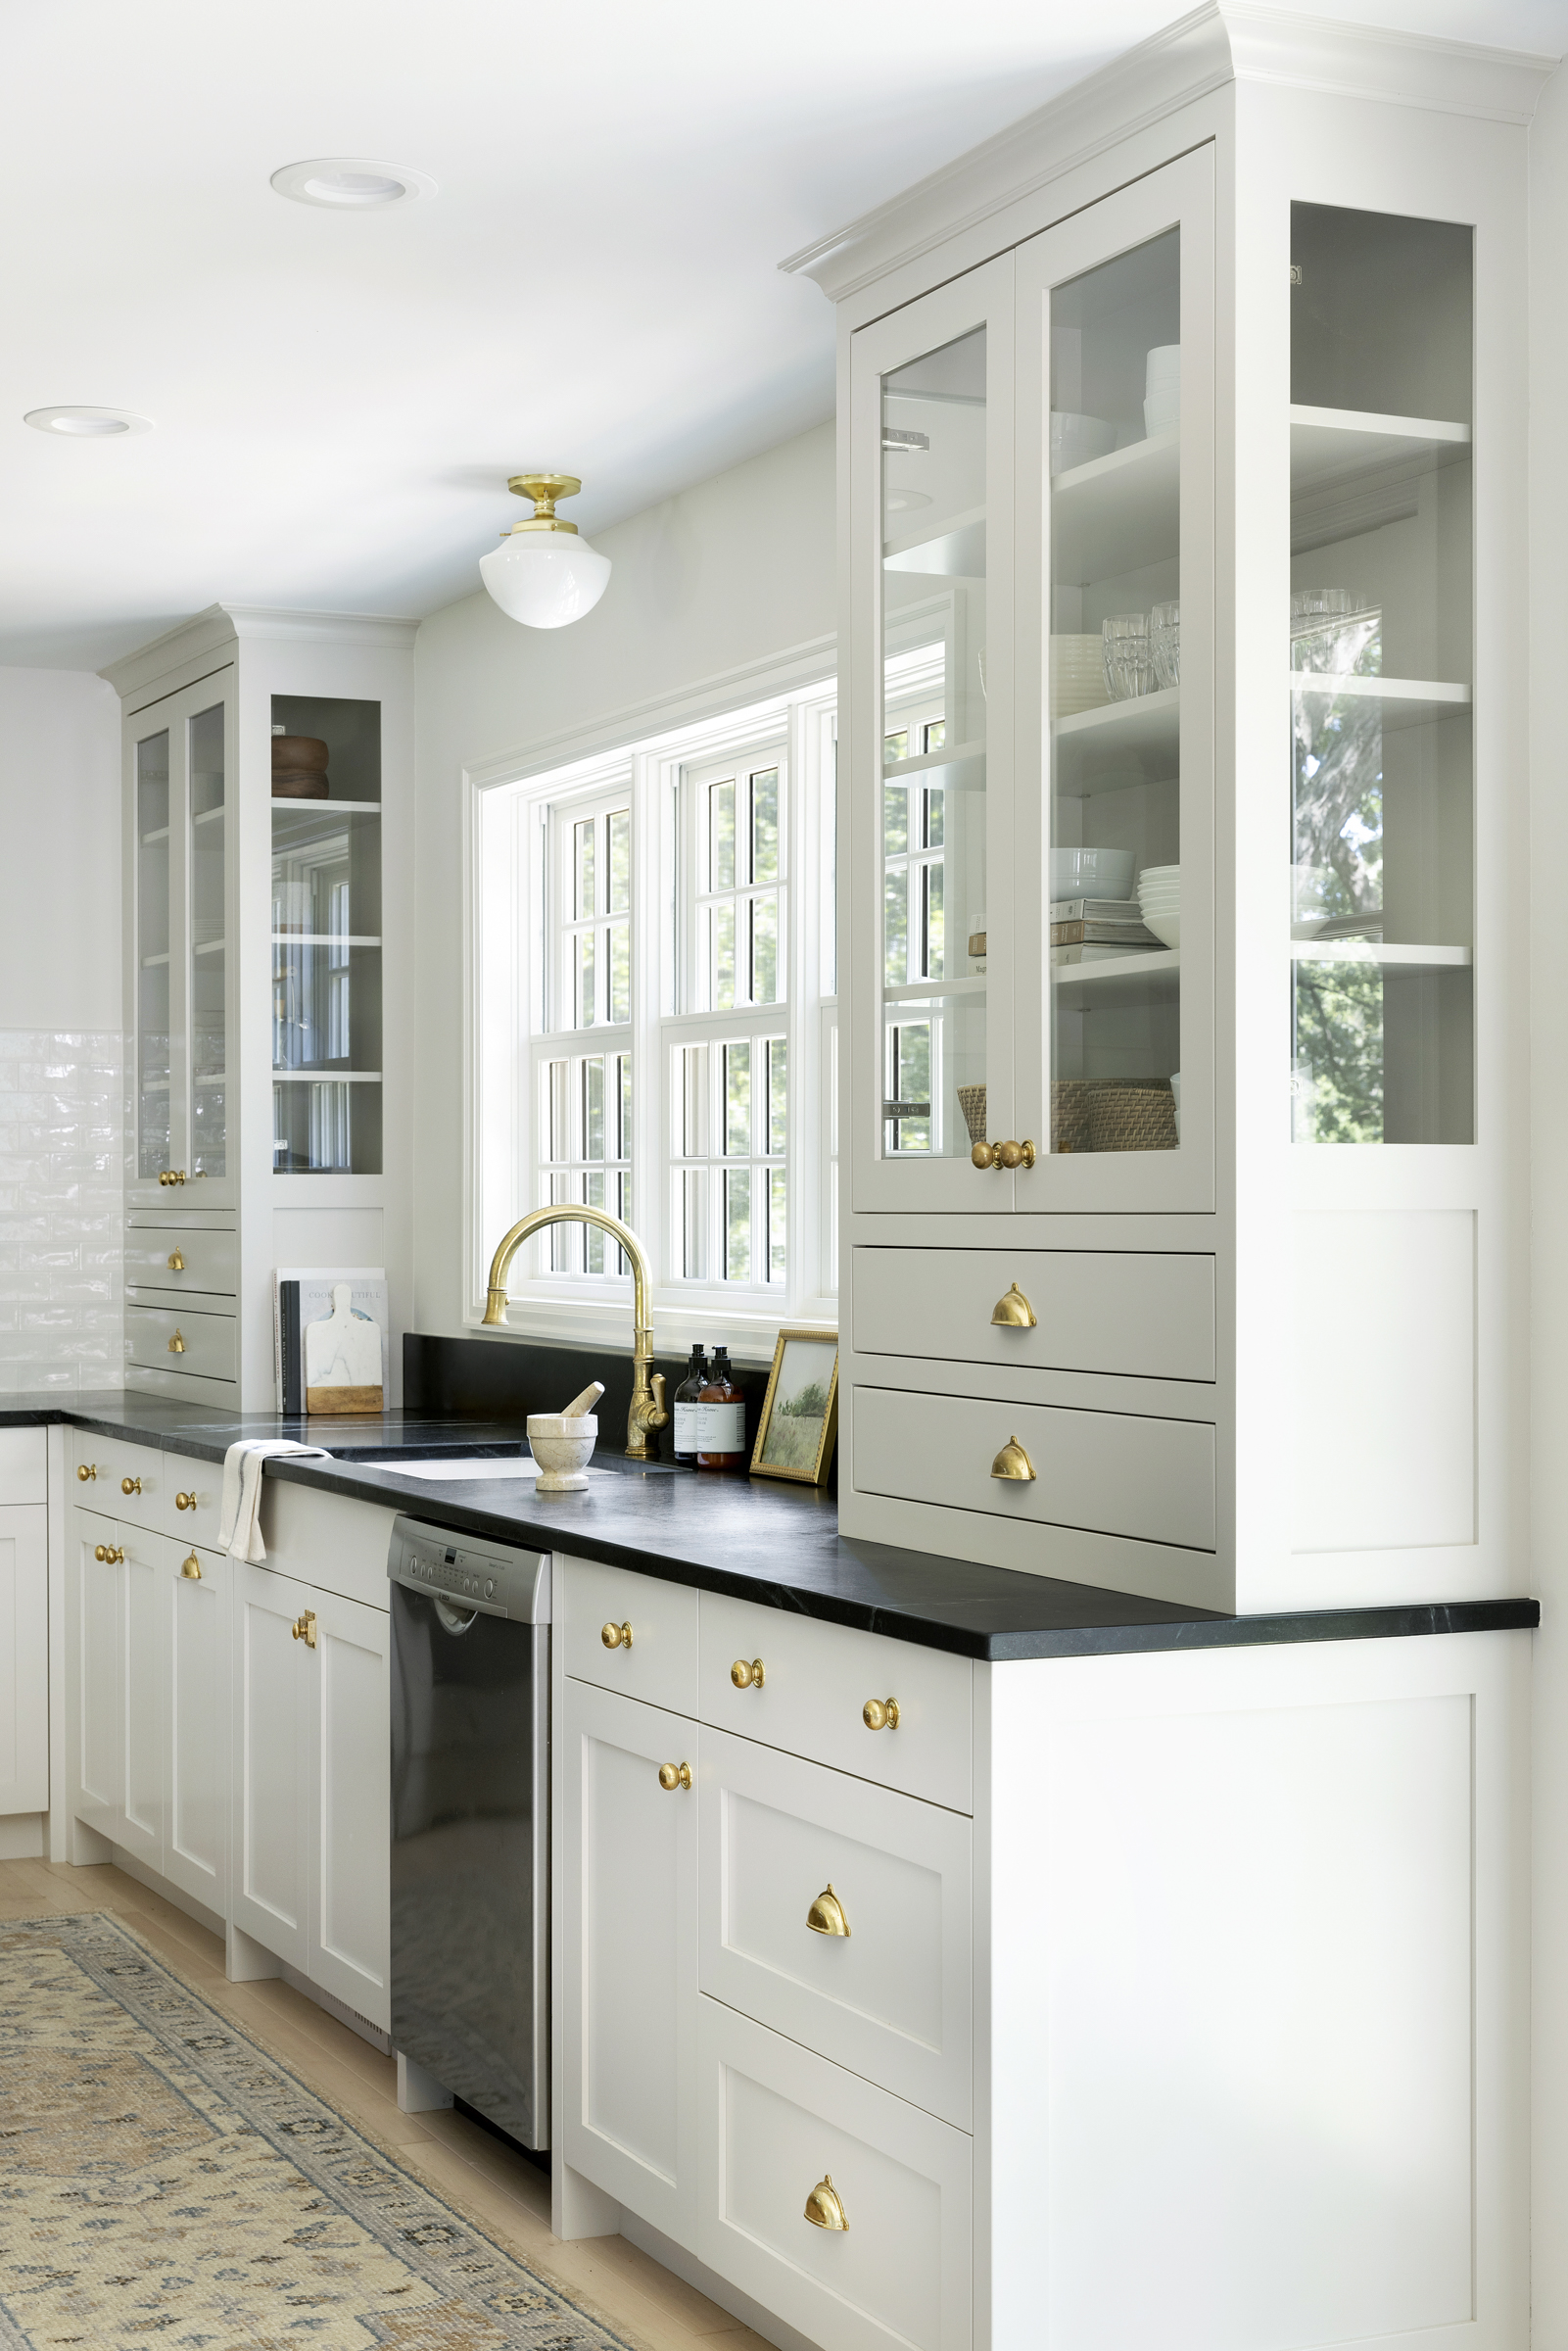 Natural soapstone countertops, traditional kitchen, with off white cabinetry.